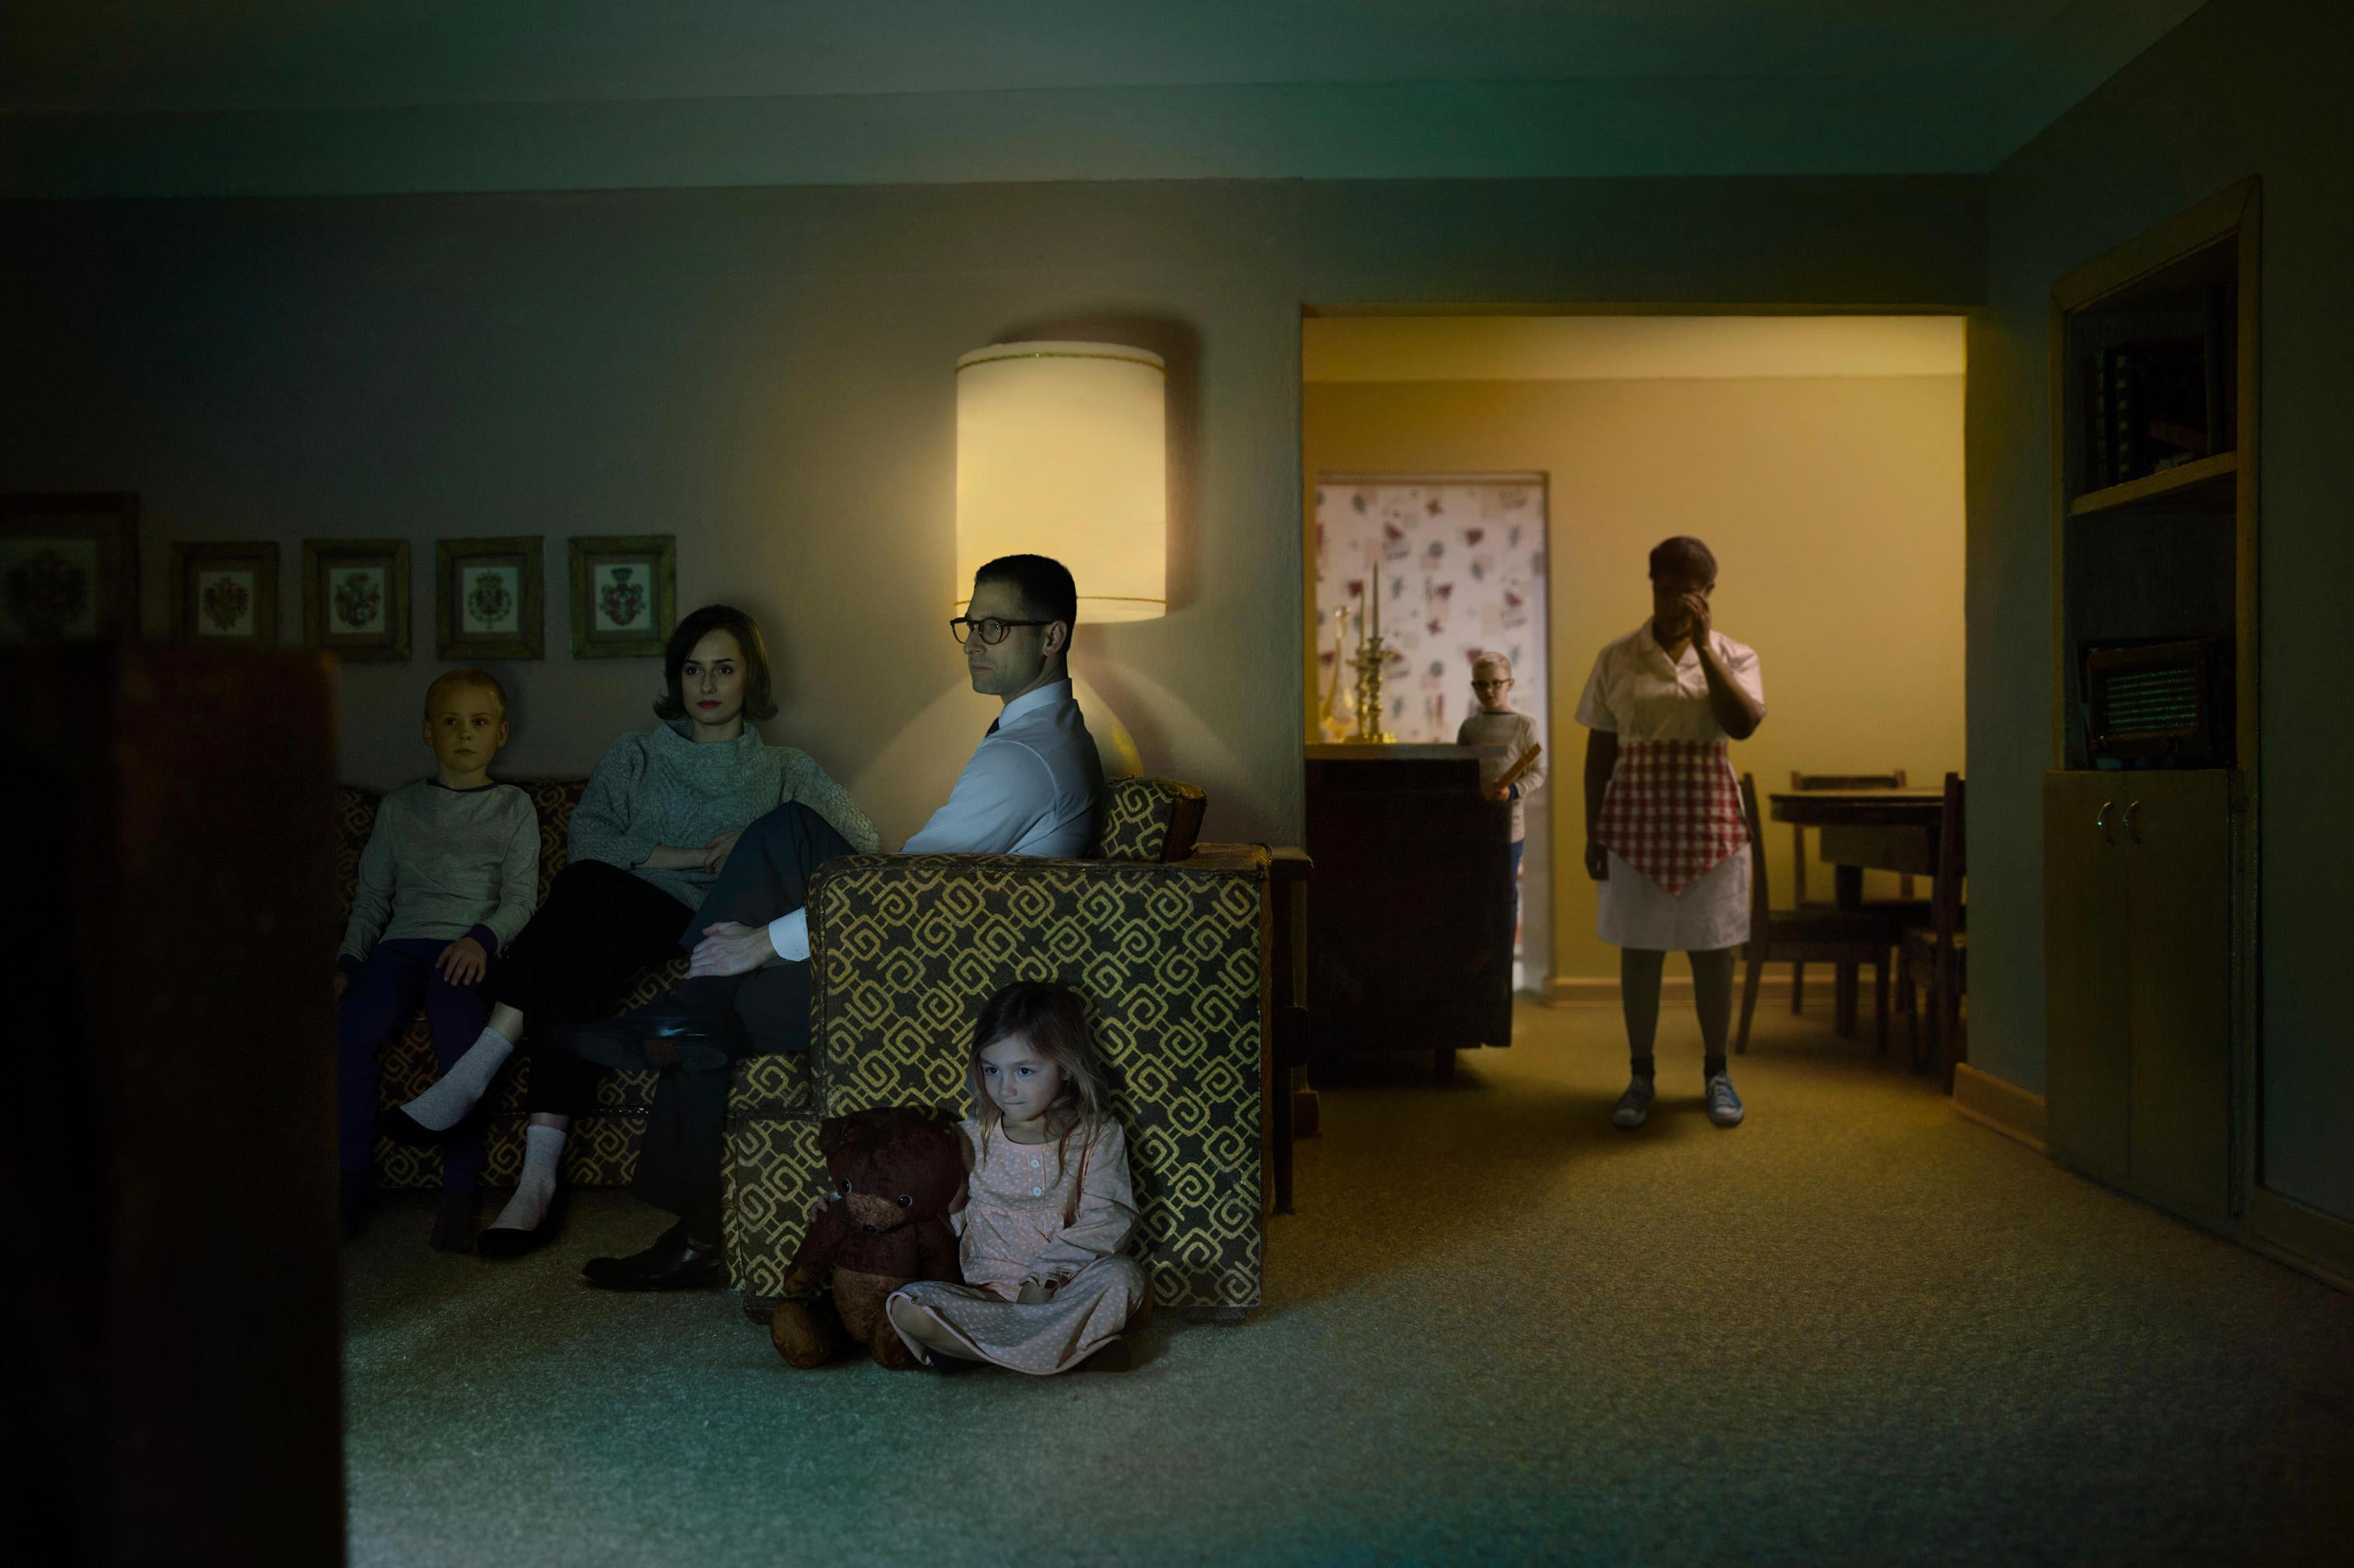 Richard Tuschman Color Photograph - Family in the Evening, limited edition photograph, signed, archival pigment ink 